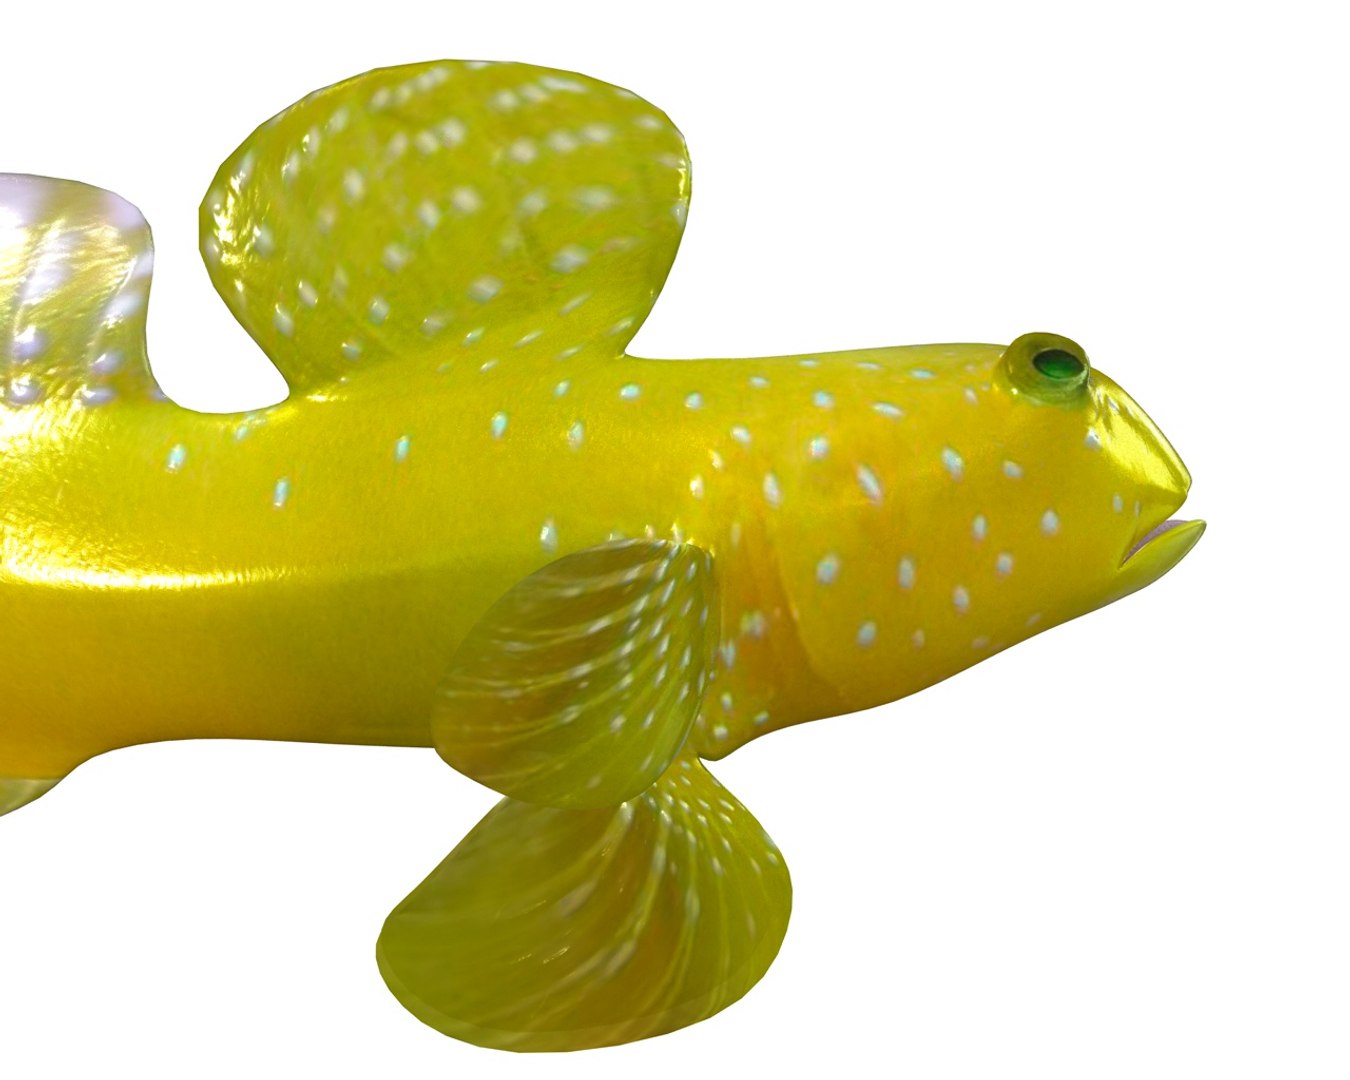 goby fish 3D Models to Print - yeggi